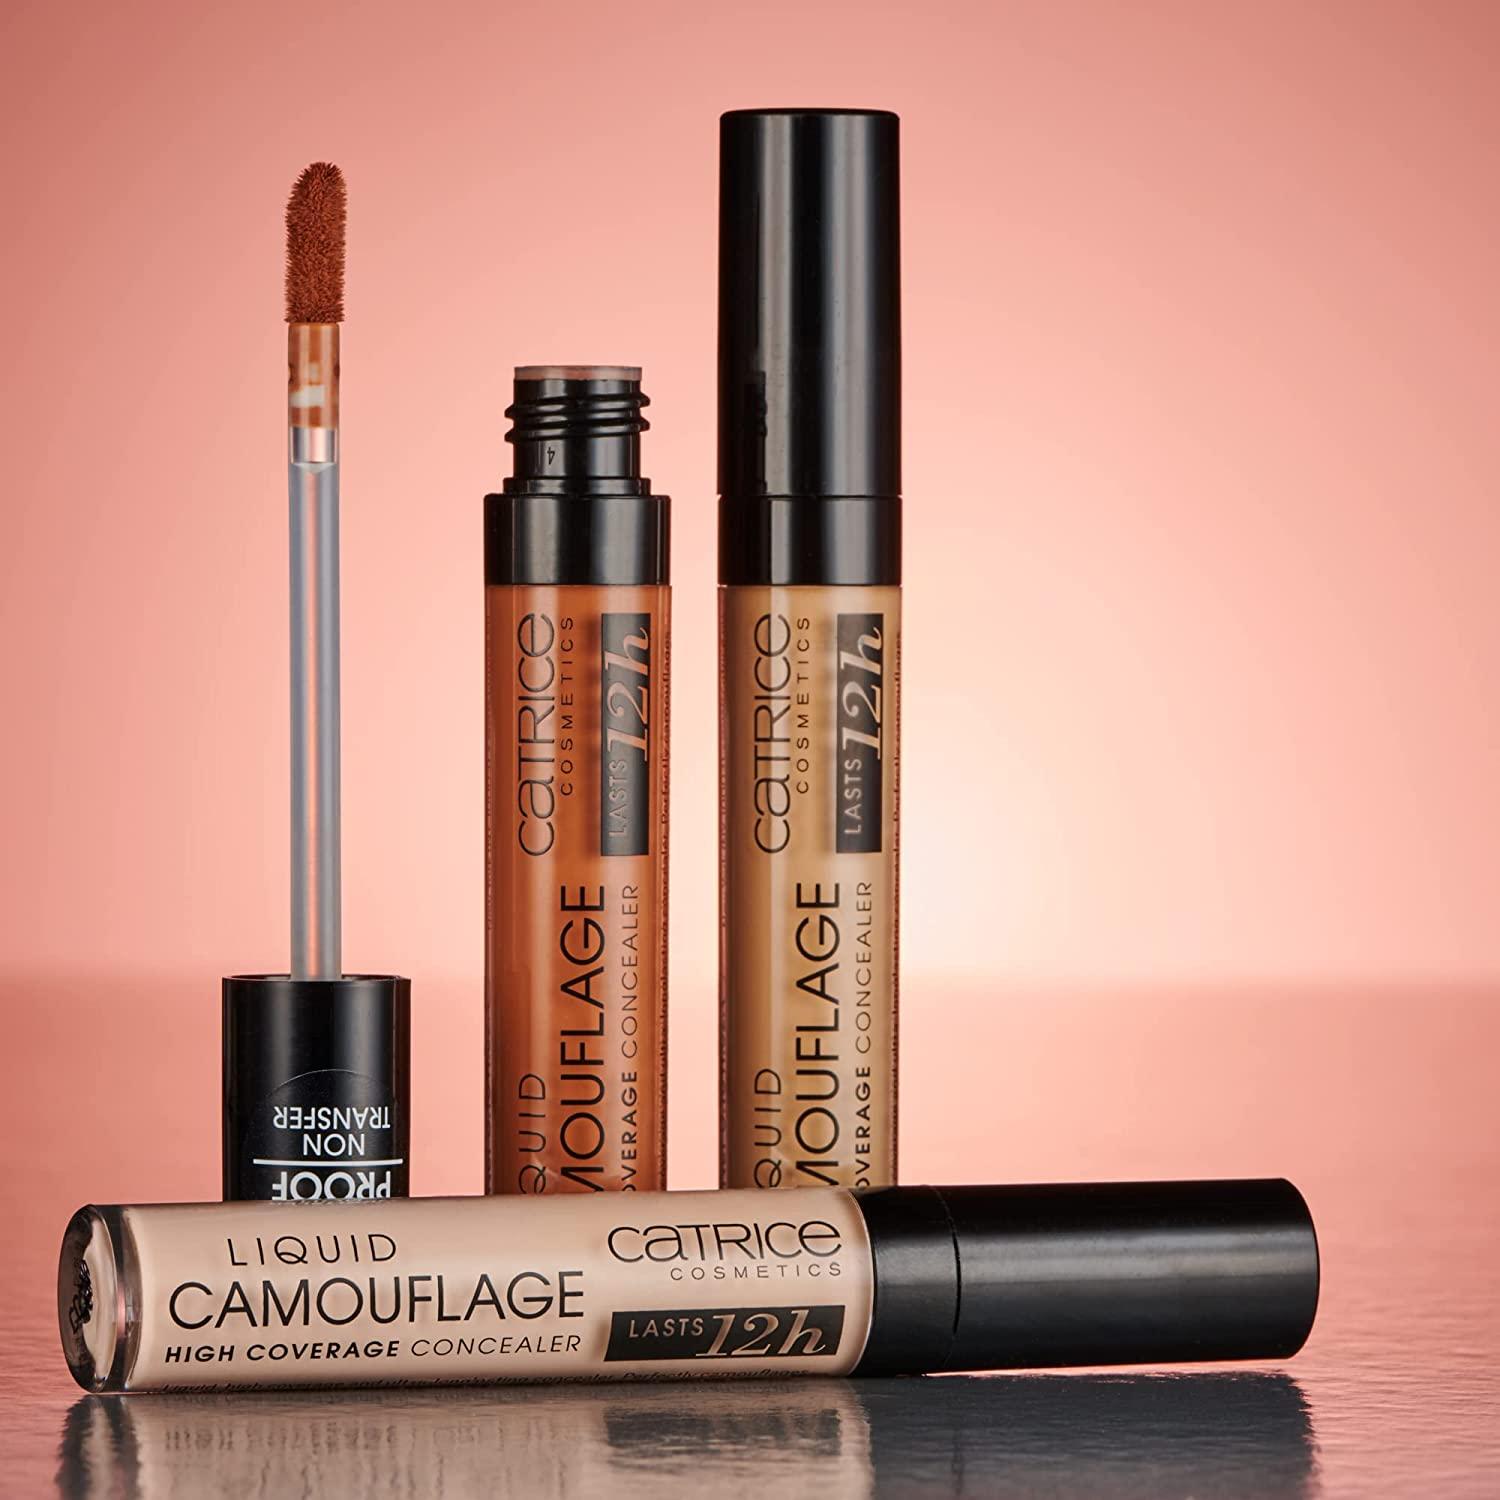 Catrice, Liquid Camouflage High Coverage Concealer